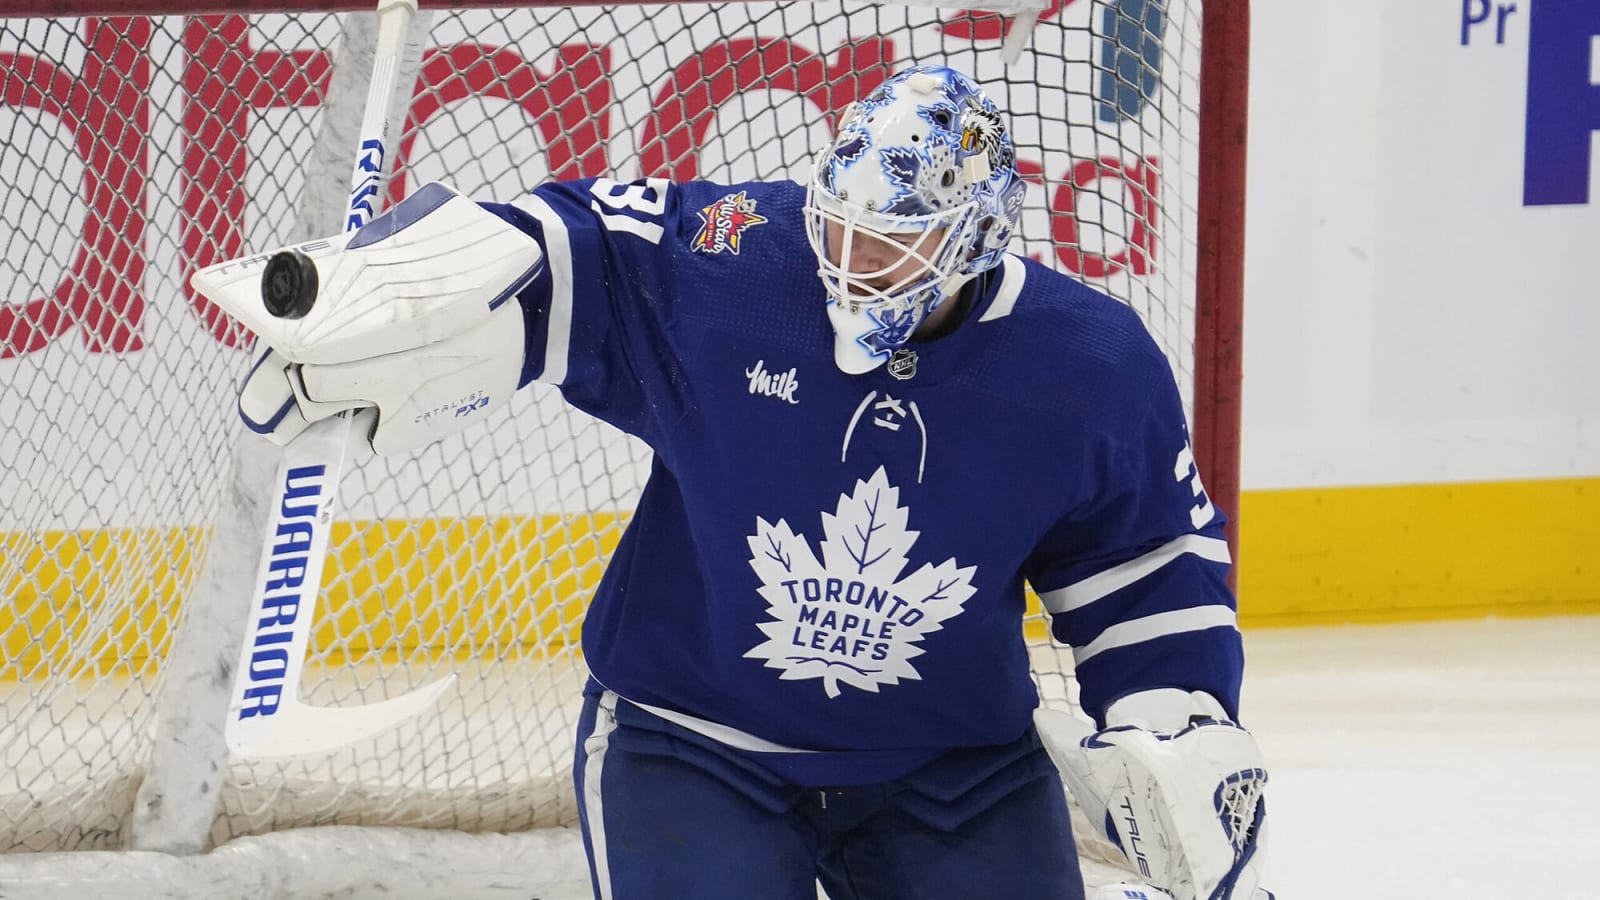 Jones returns to the crease, Lajoie enters lineup as Maple Leafs look to sweep homestand vs. Ducks